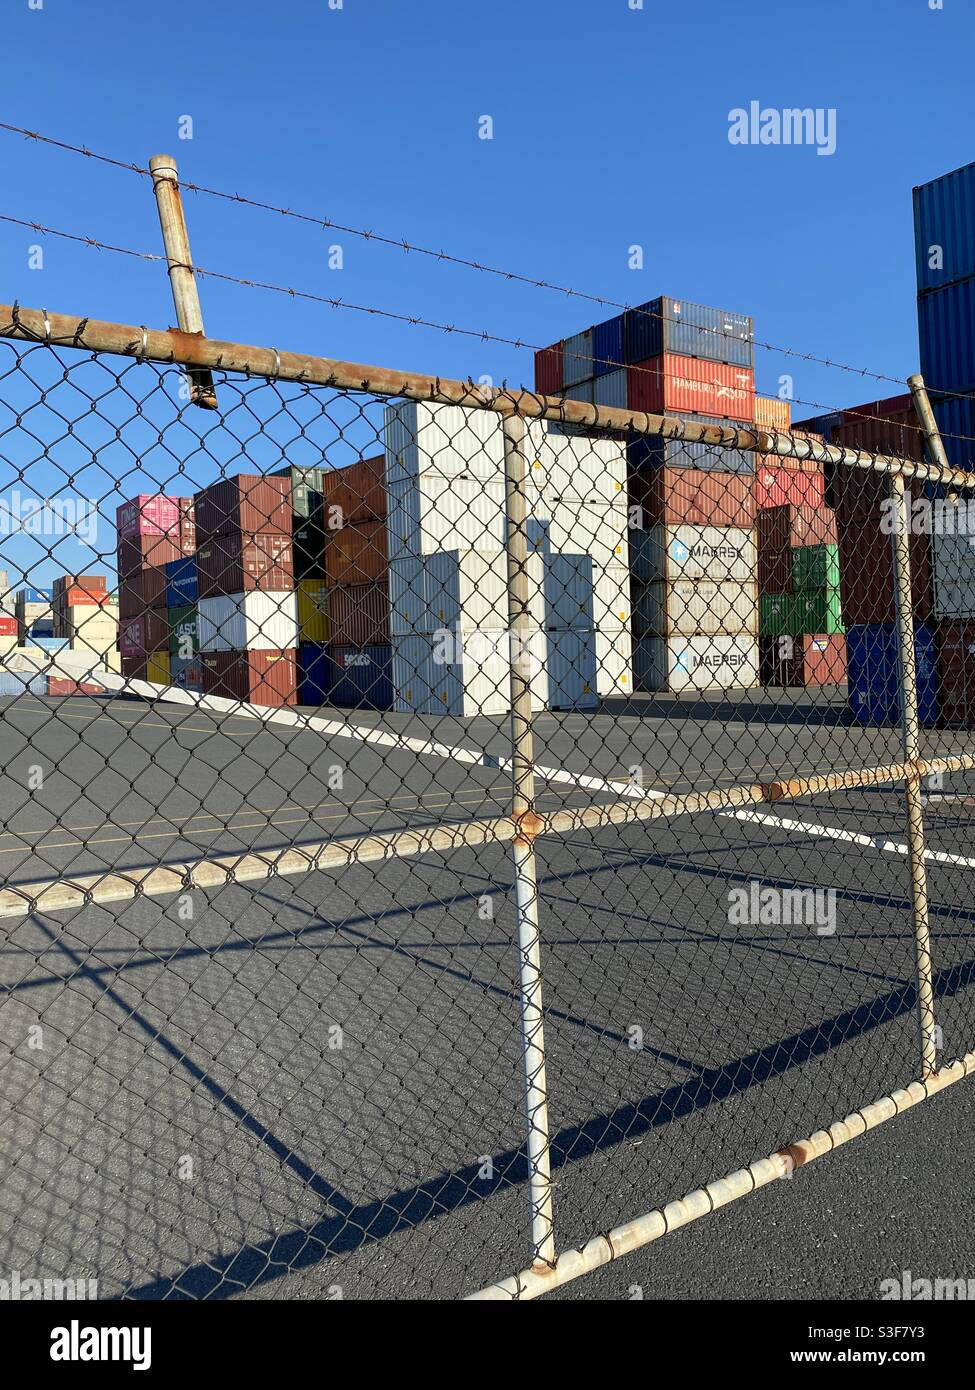 Stacks of shipping containers in a shipyard awaiting customs clearance Stock Photo